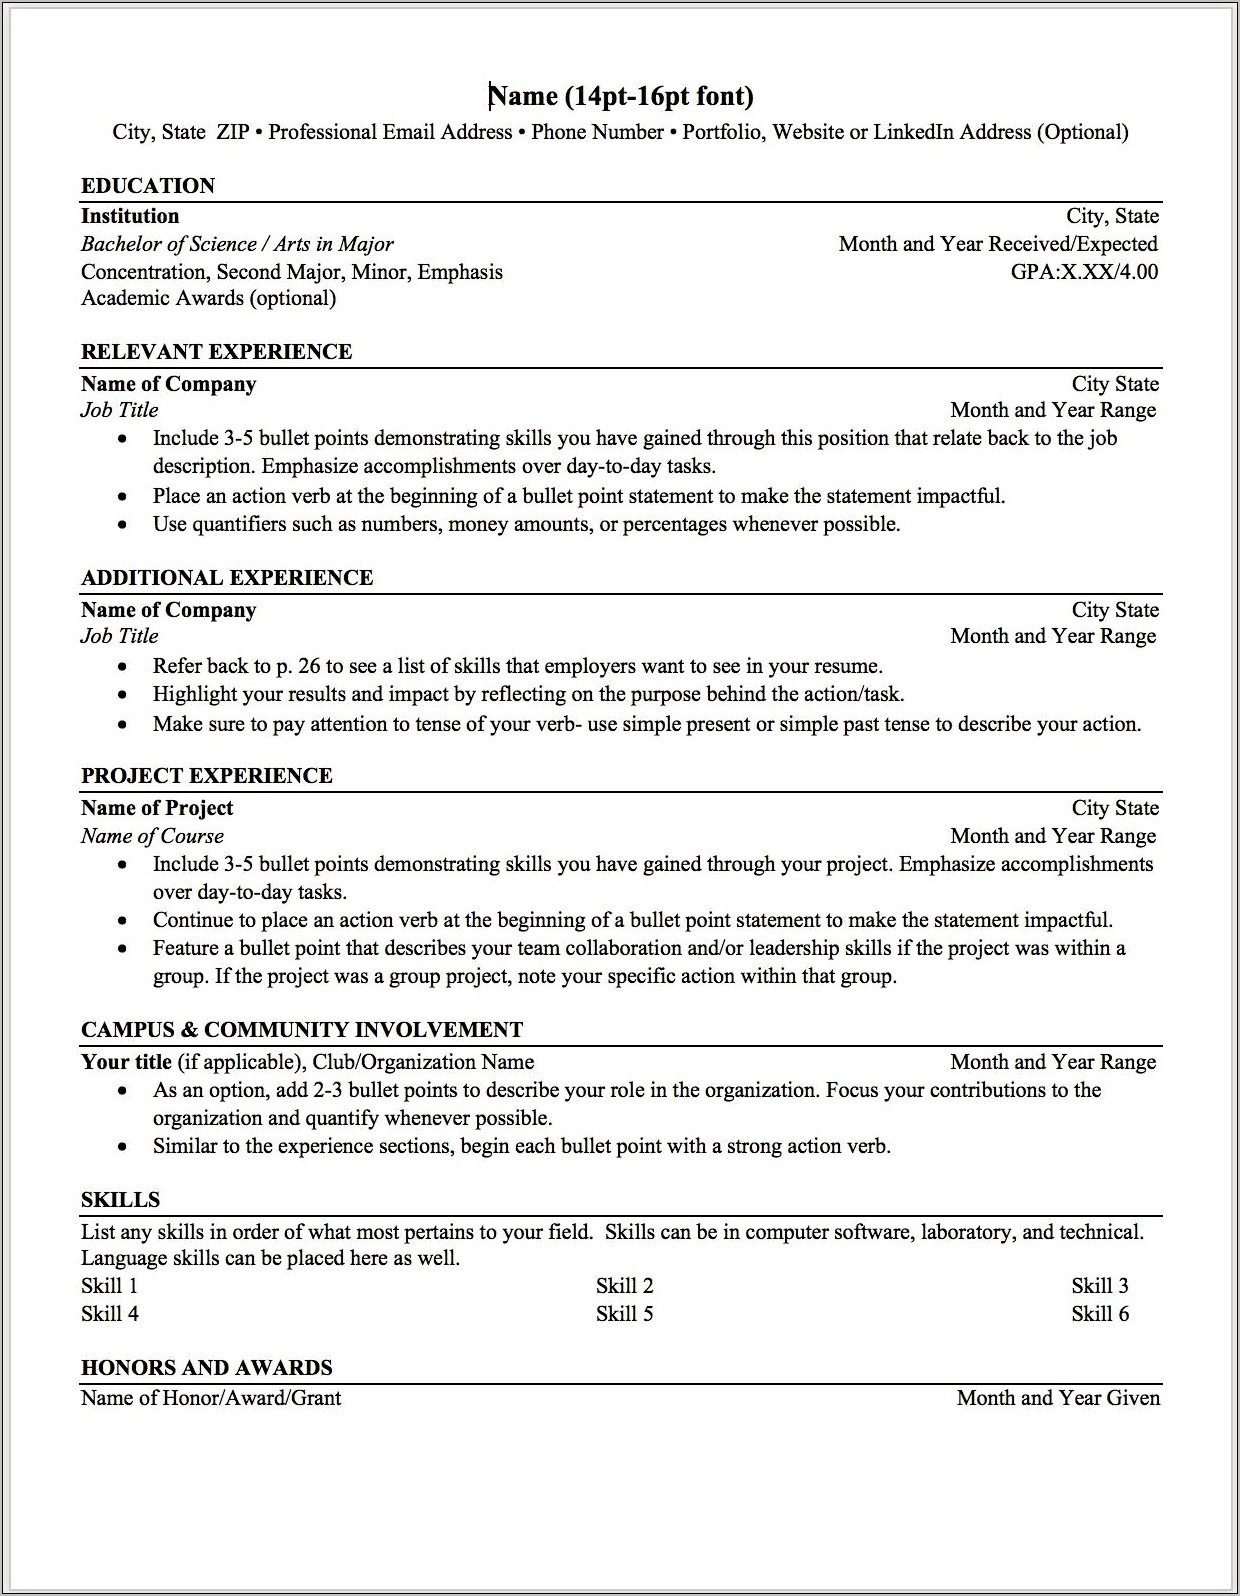 Dual Degrees On Resume 2nd Job Since College